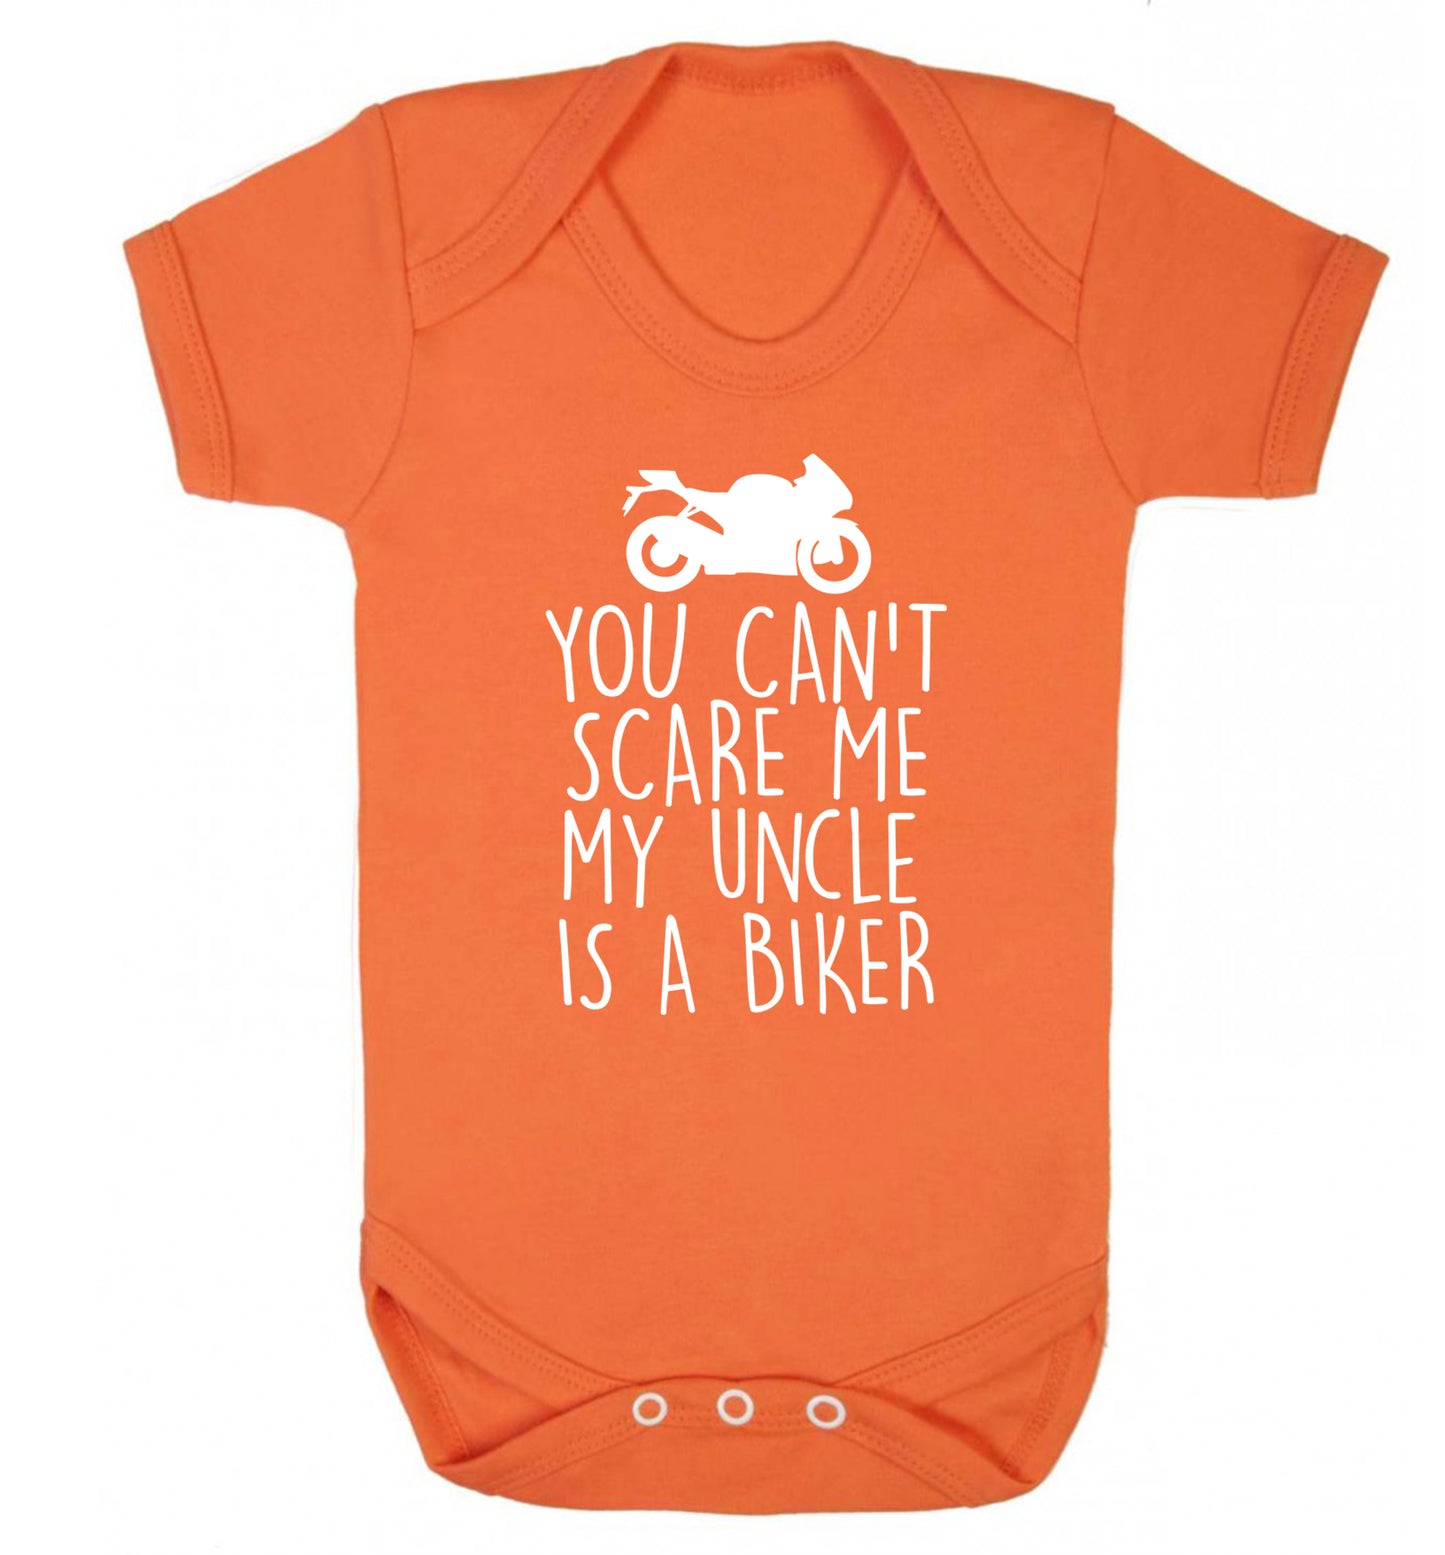 You can't scare me my uncle is a biker Baby Vest orange 18-24 months